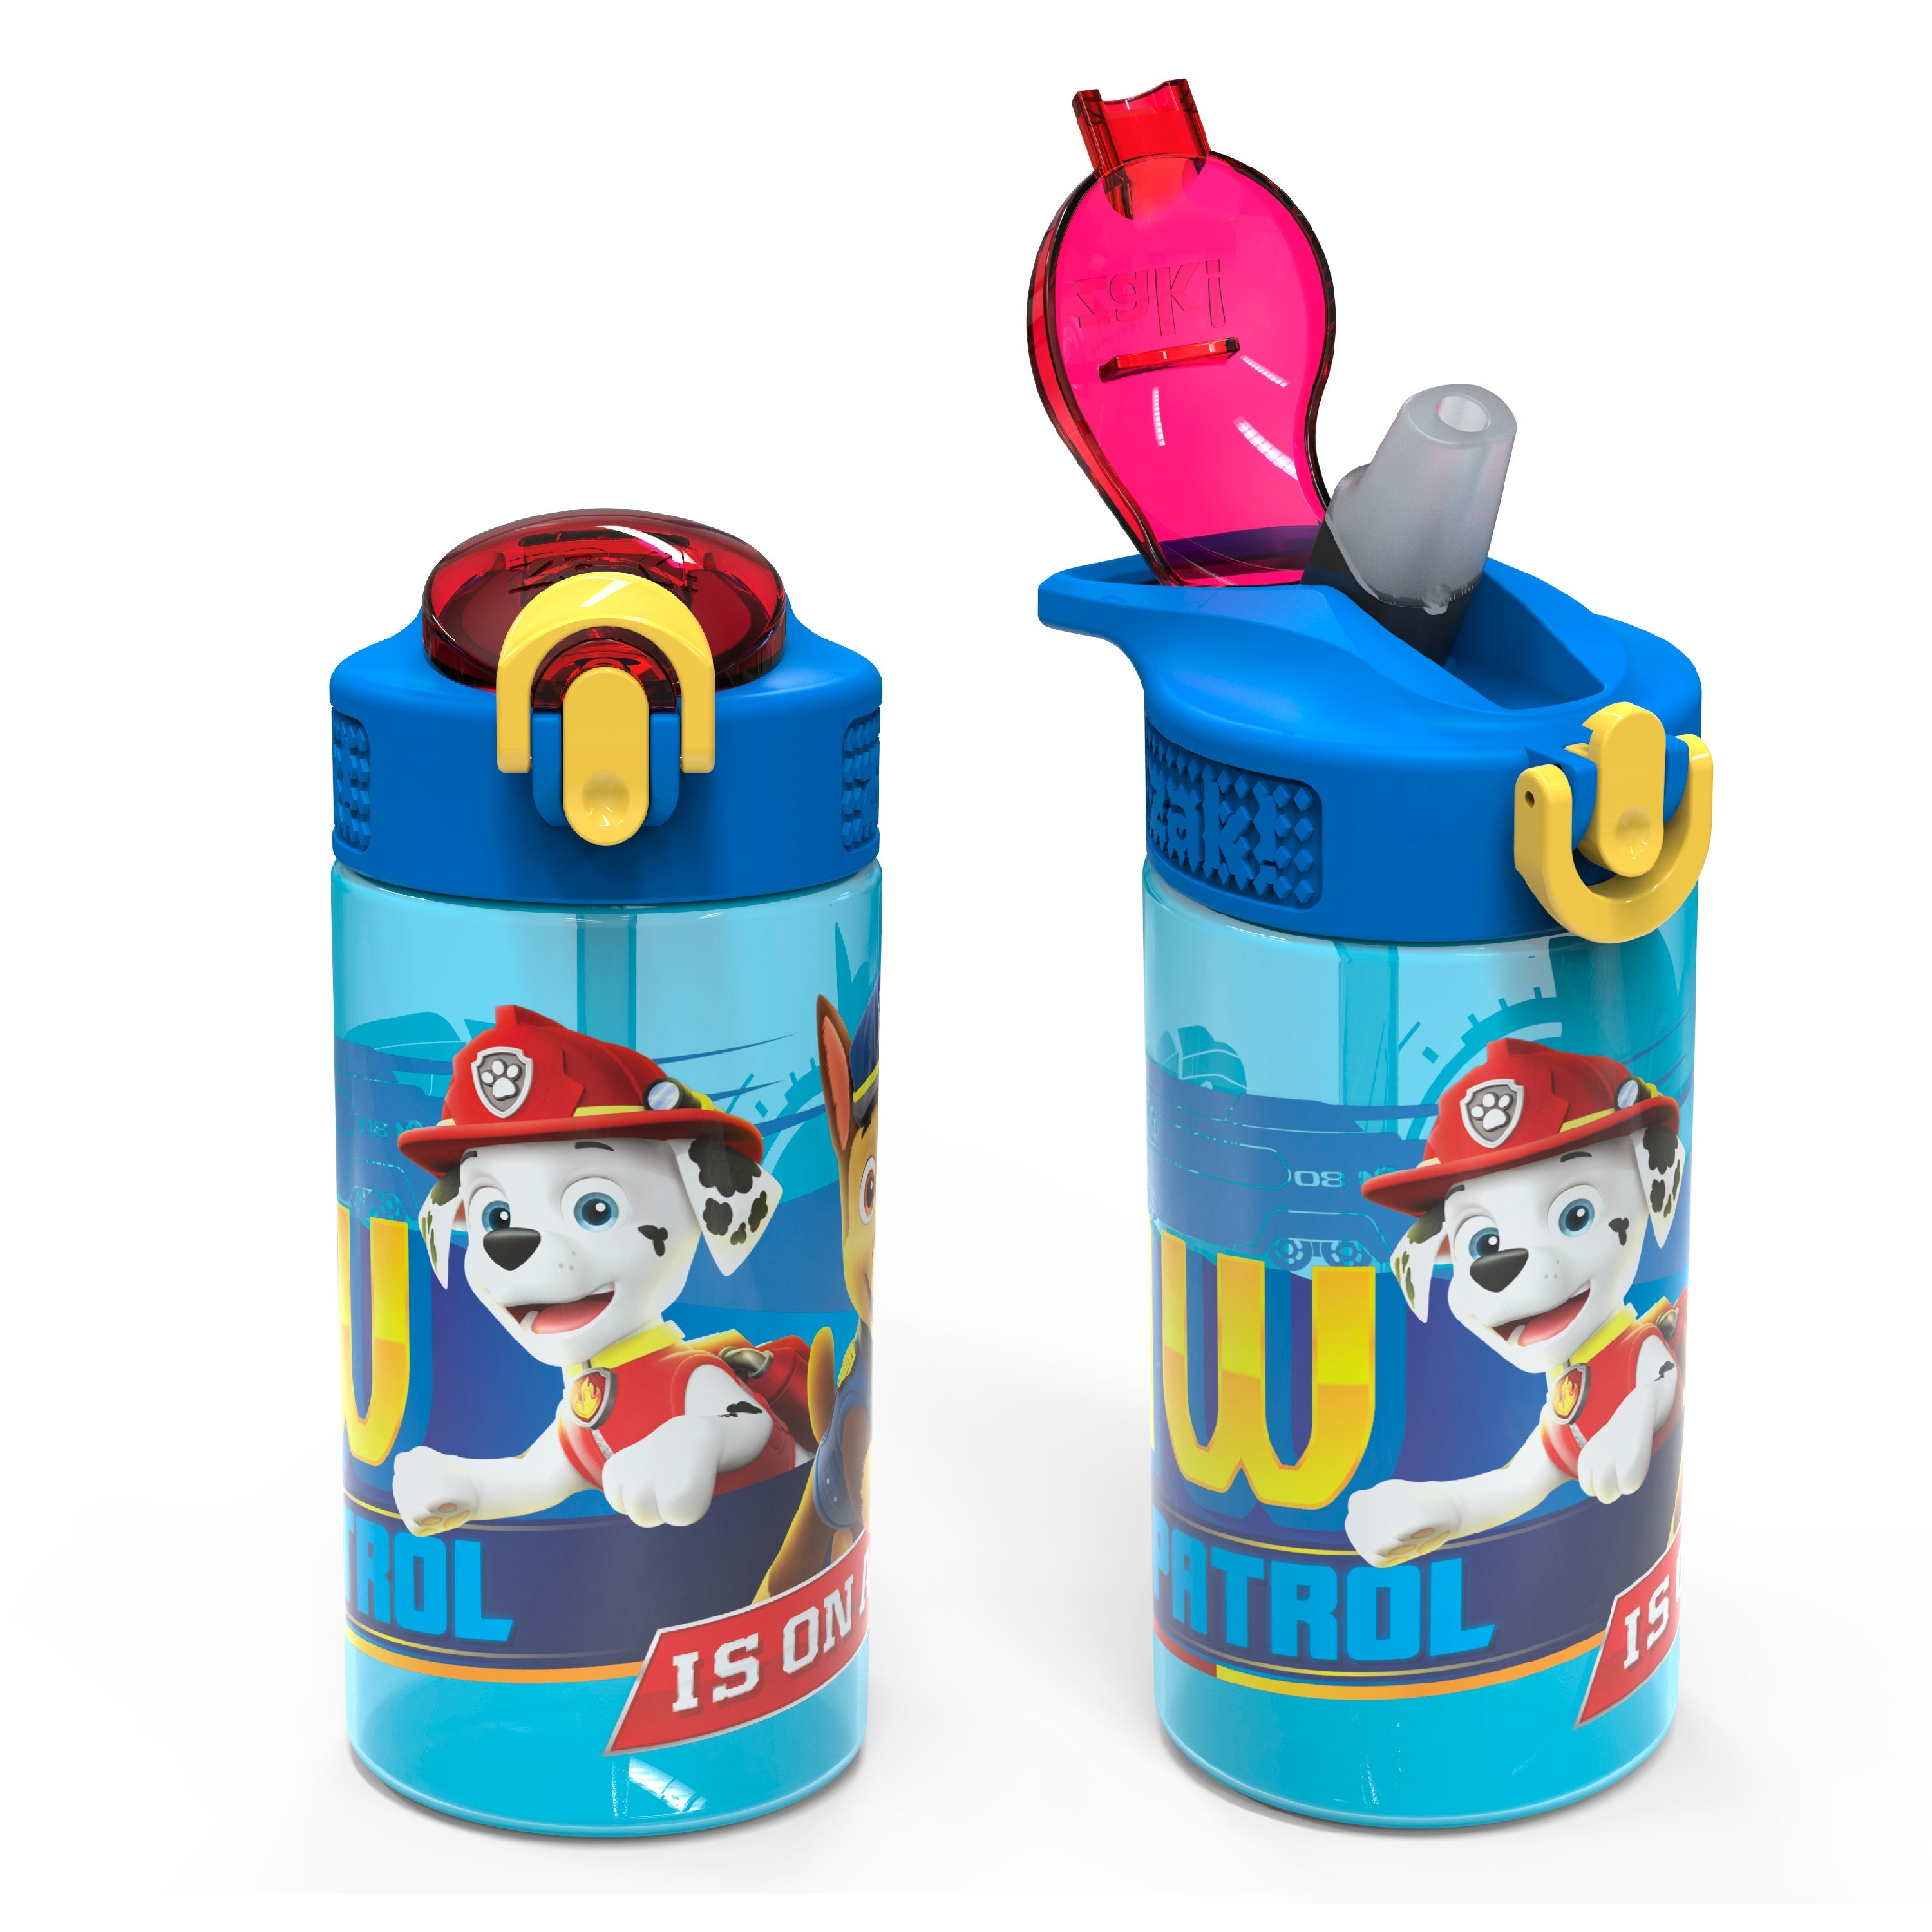 Zak Designs 15.5 oz Kids Water Bottle Stainless Steel with Push-Button and  Locking Cover, Paw Patrol Skye